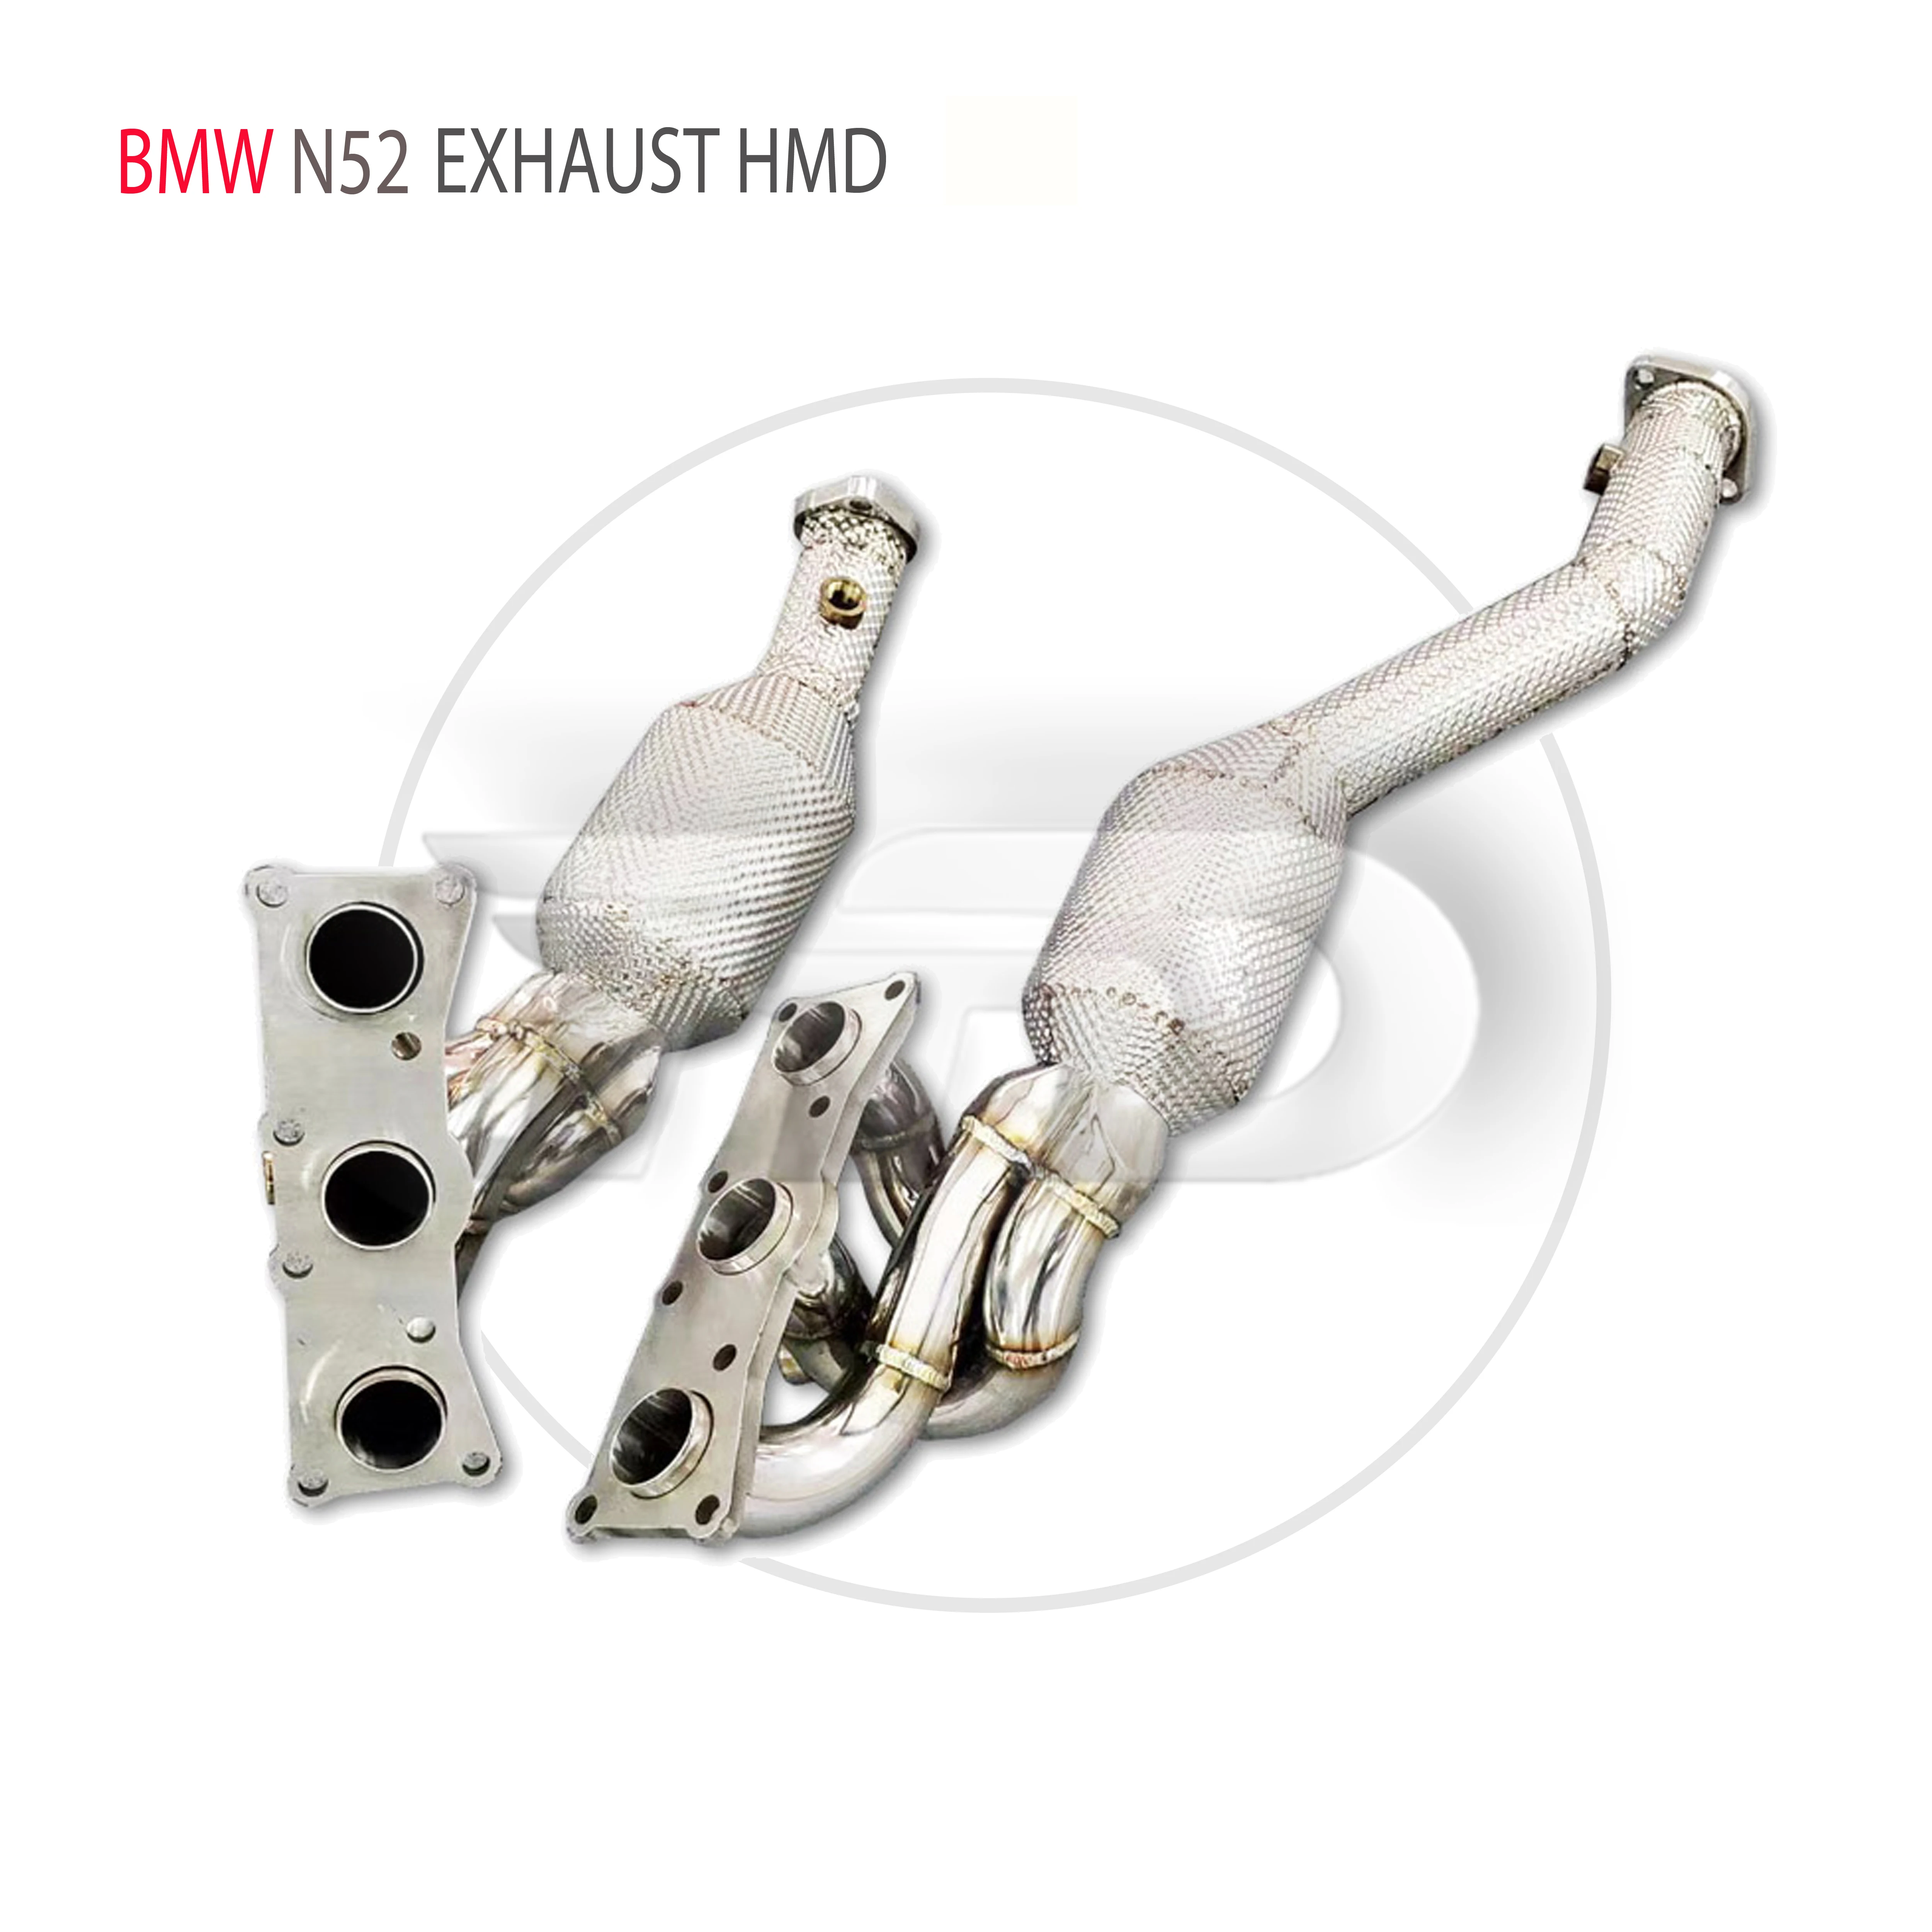 

HMD Exhaust System High Flow Performance Downpipe for BMW 730Li F02 N52 Engine 3.0L Car Accessories With Catalytic